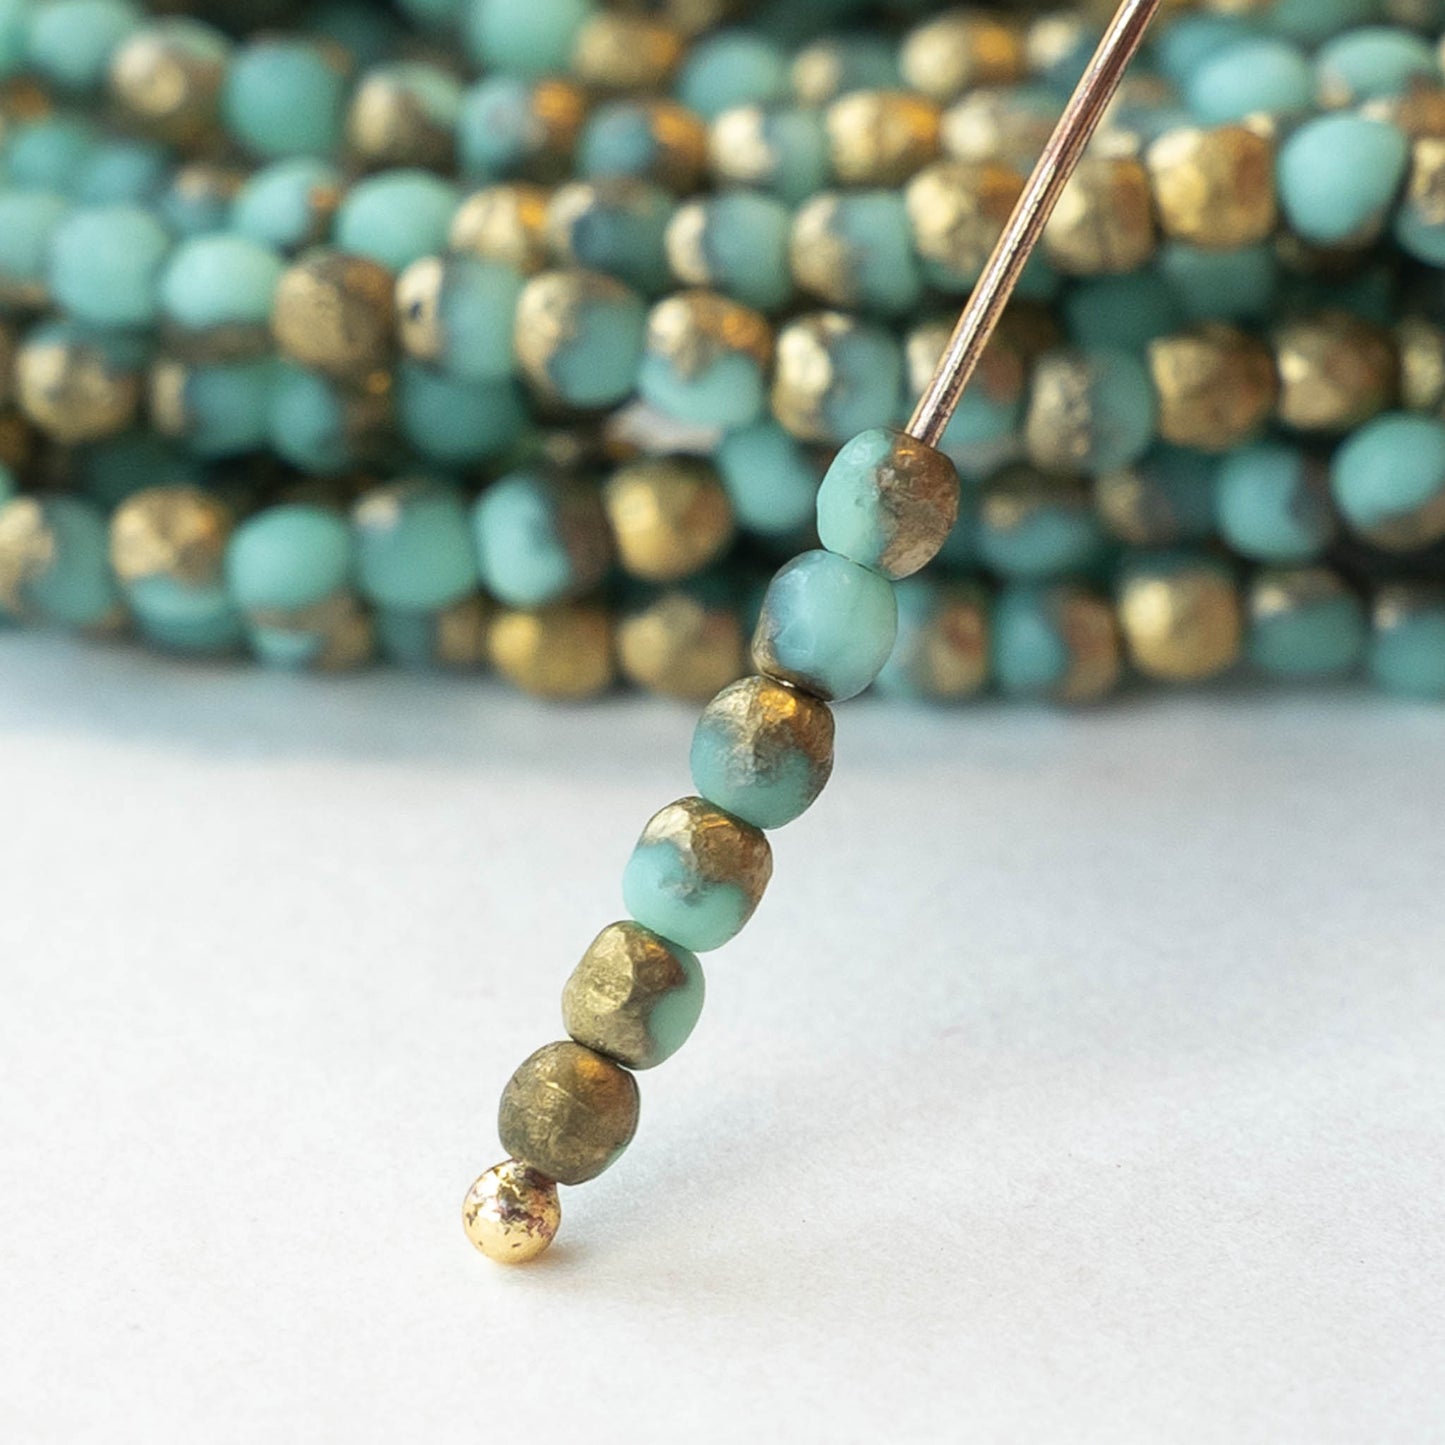 3mm Round Firepolished Beads - Opaque Seafoam with Etched Gold - 50 Beads